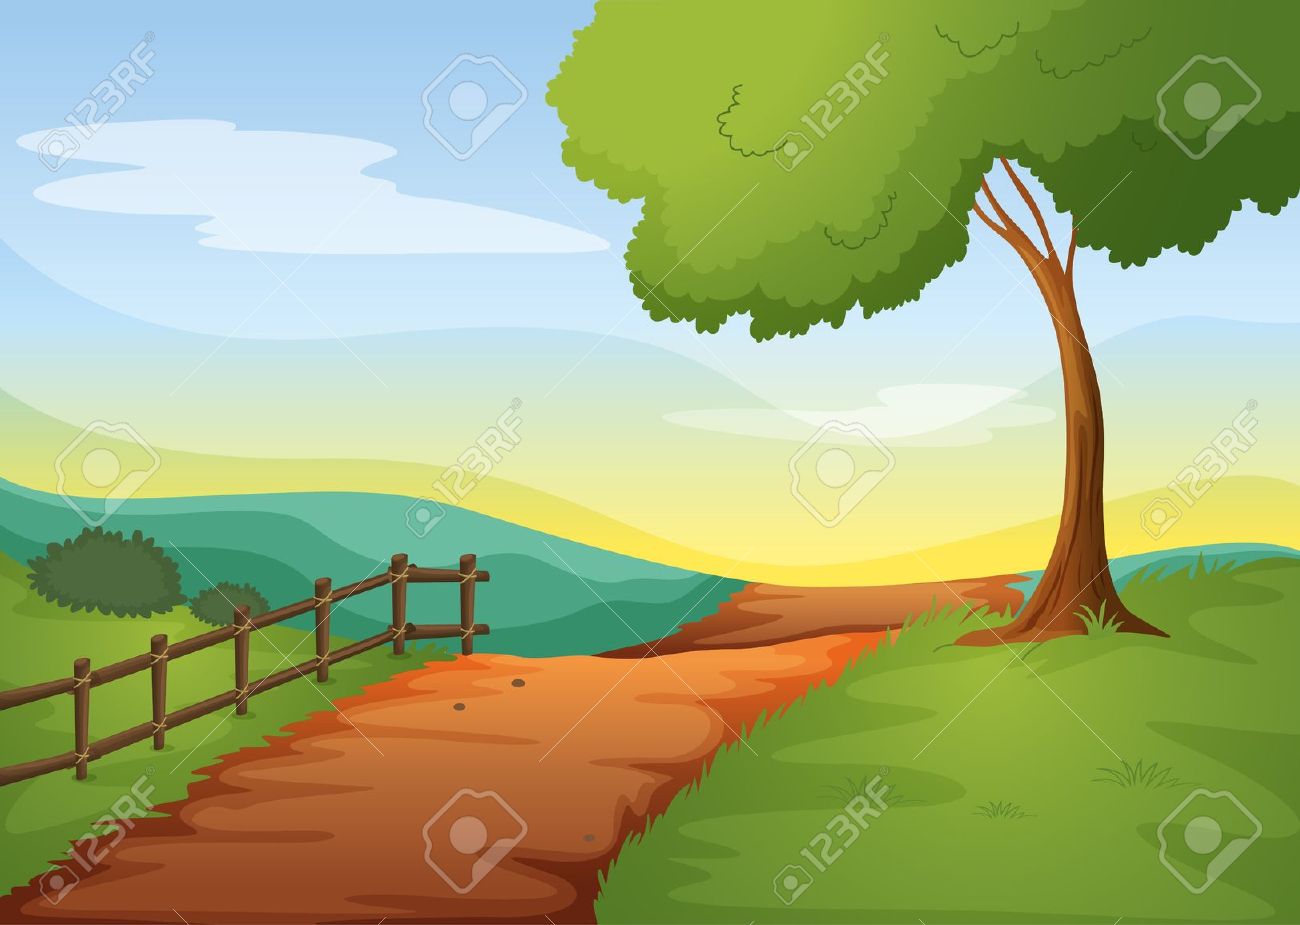 Dirt road clipart - Clipground